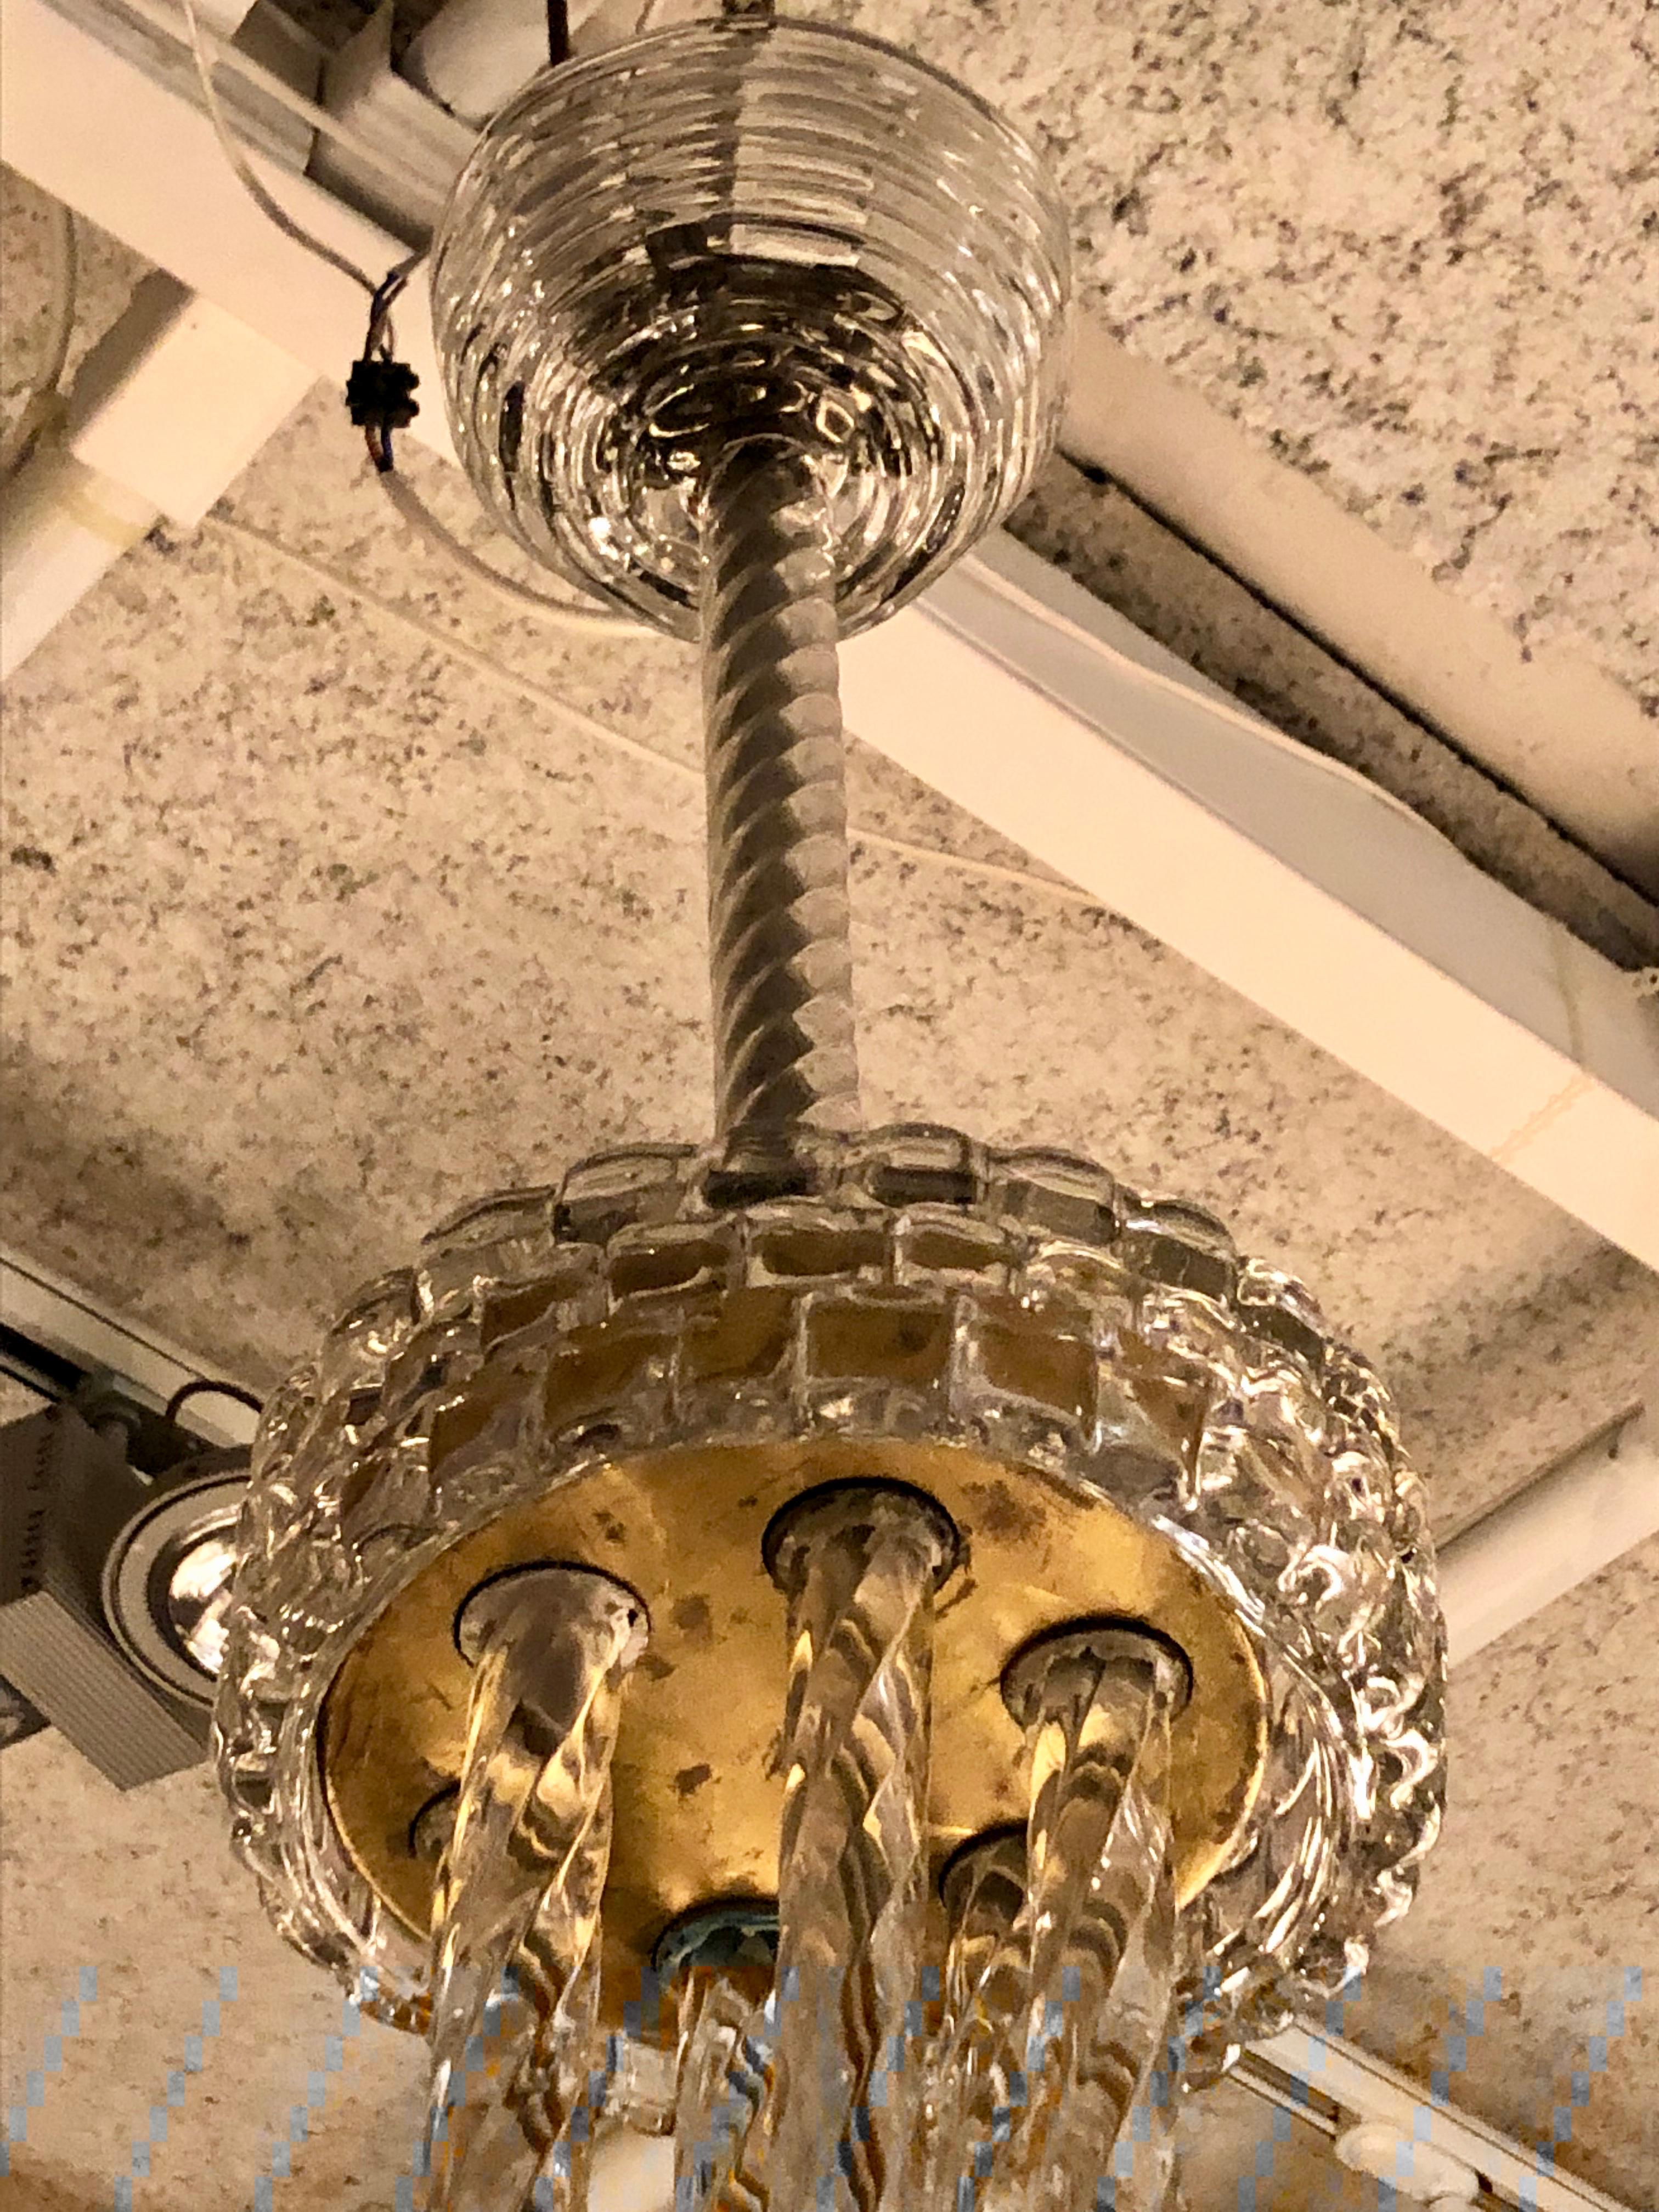 Rare Barovier blown glass chandelier in thick glass with a very original and interesting design.
Hard to find on the market, 100% original from the period. We keep the original paint on the upper part but it can be arranged.
Easy to disassemble